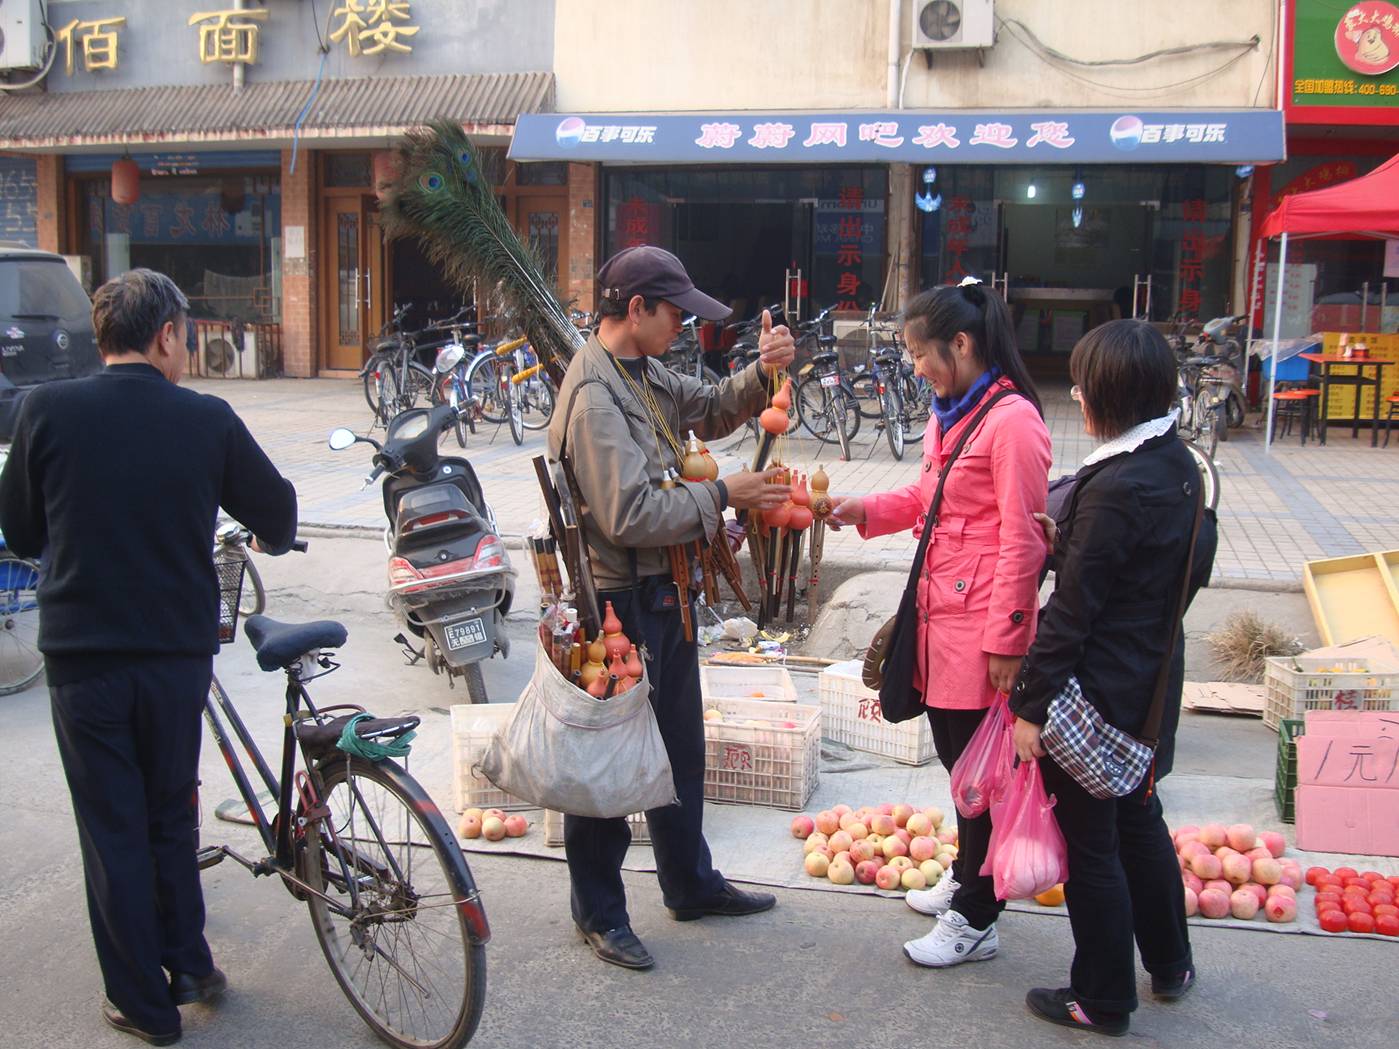 Picture:  An ambulatory music store.  The young man is selling flutes and Chinese violins and hú lu sī (gourd reed flutes) on the streets of Shitang Cun, Wuxi, China